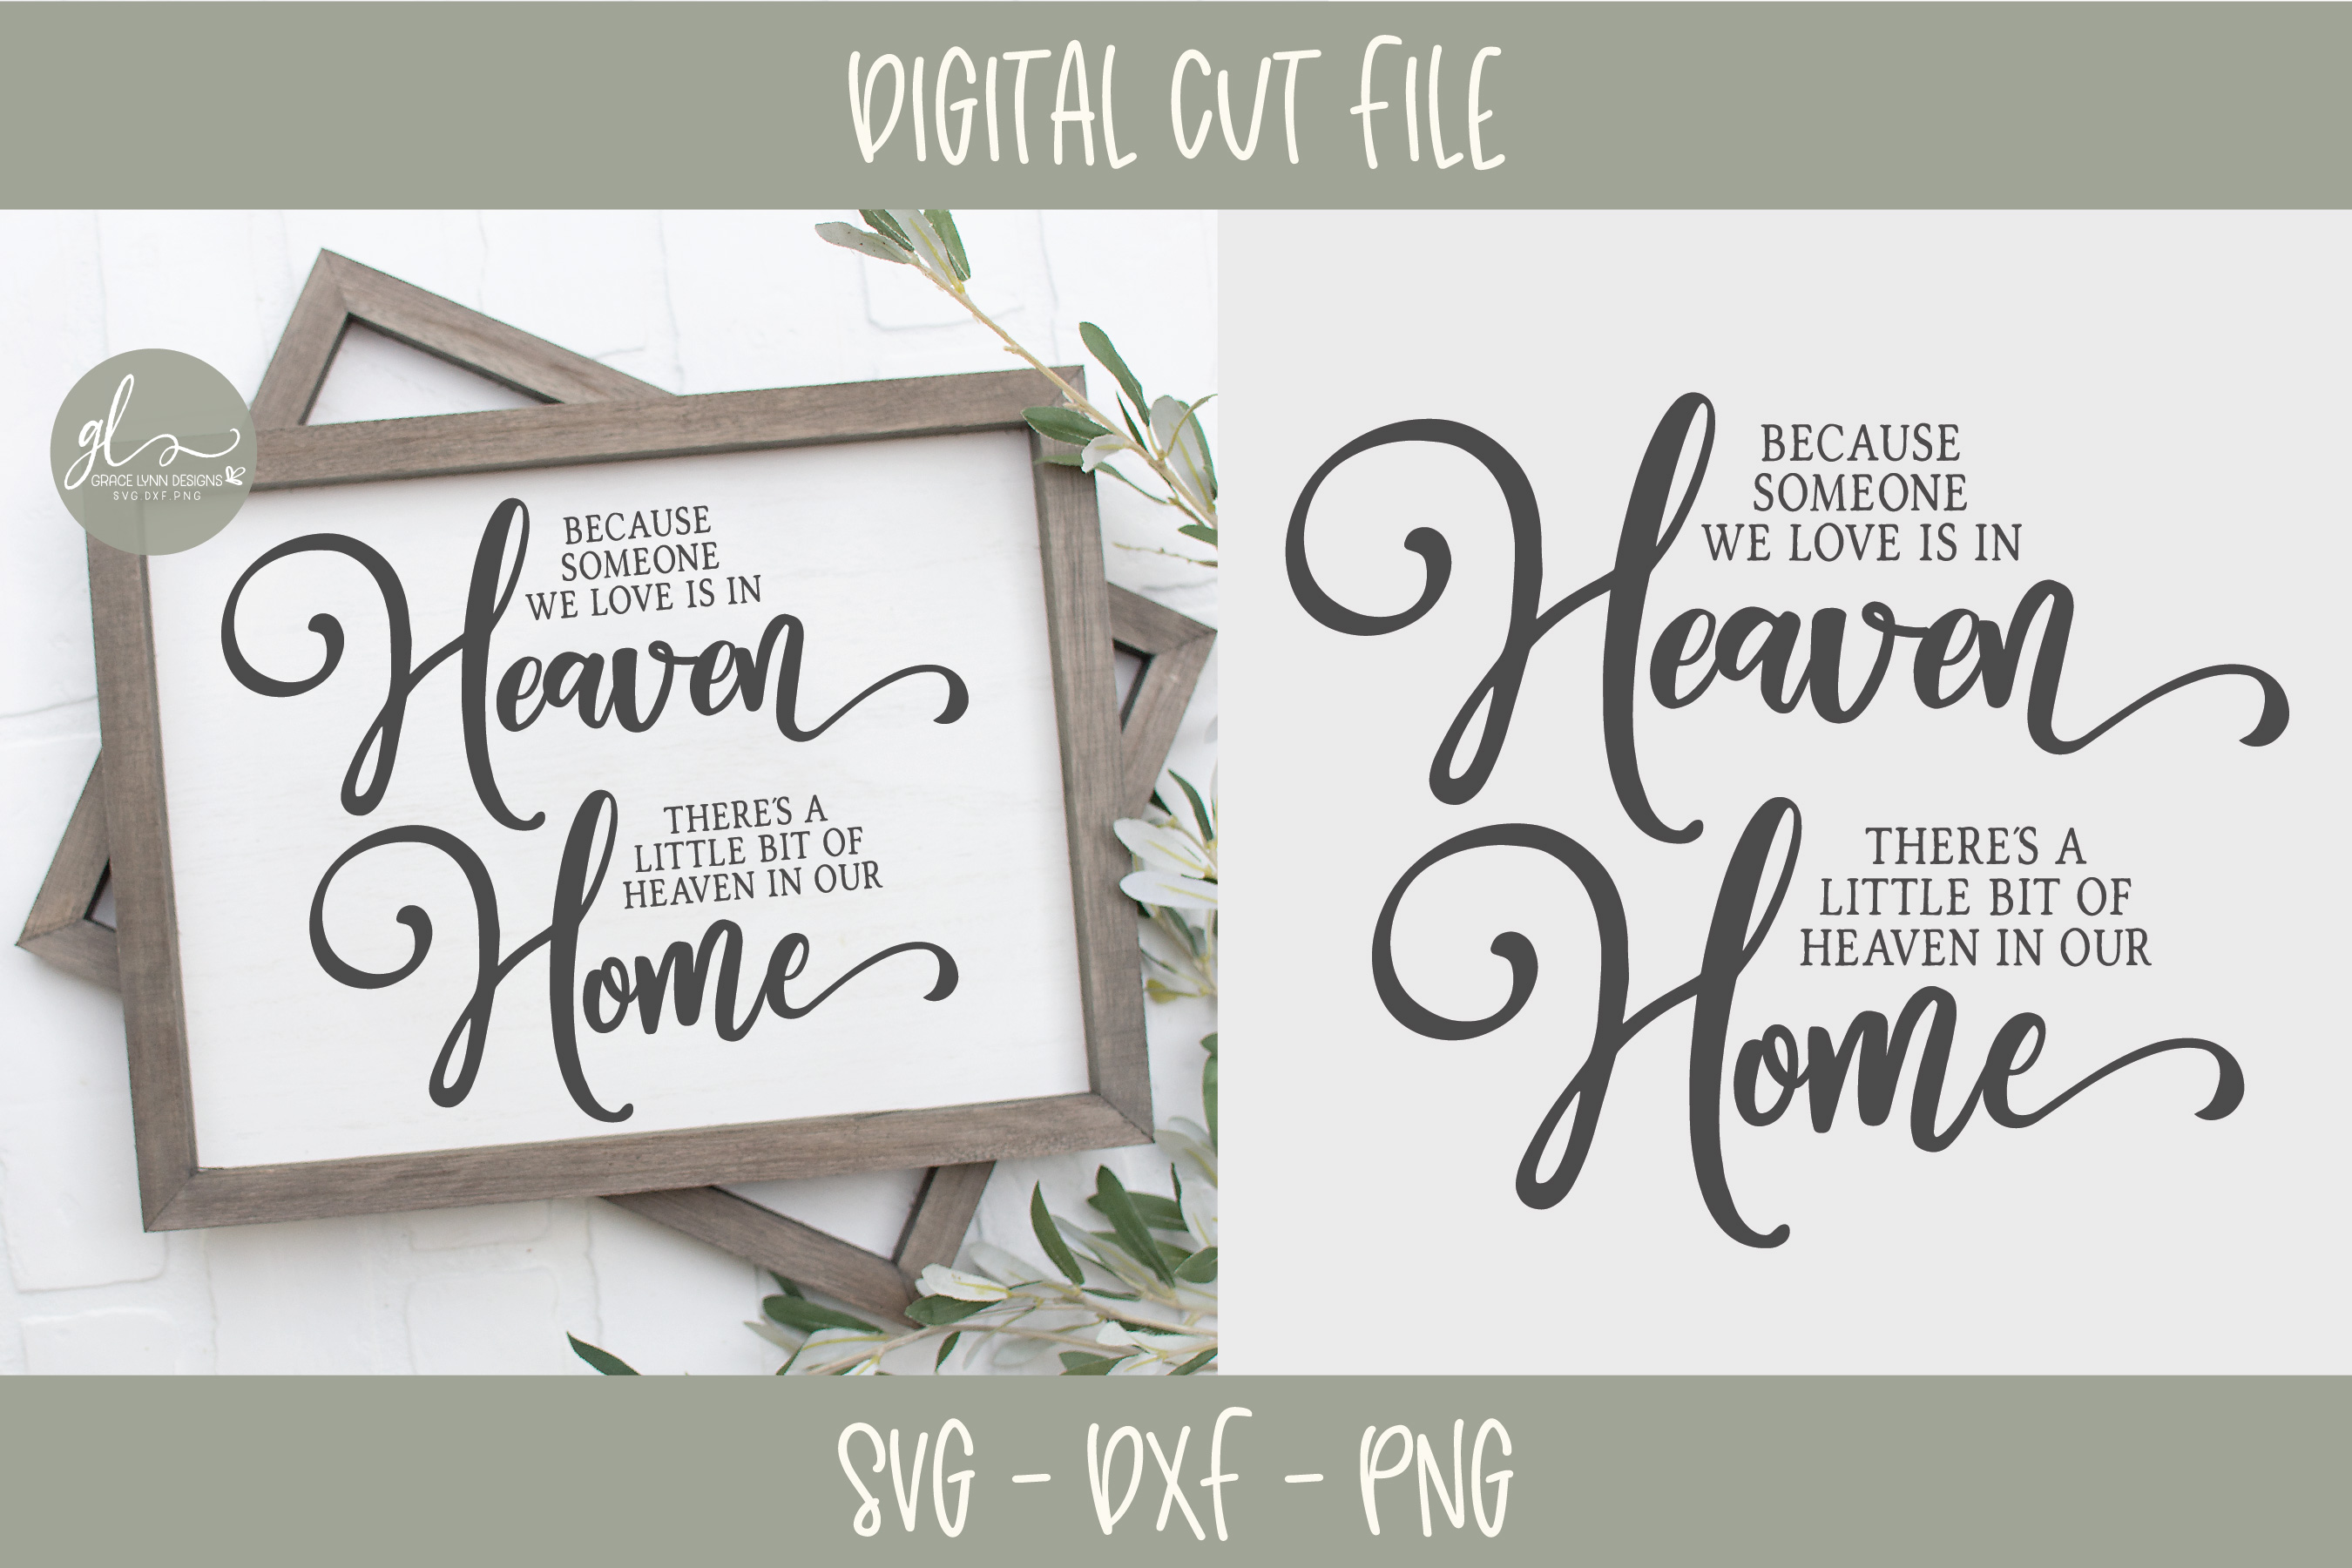 Because Someone We Love Is In Heaven - SVG Cut File ...